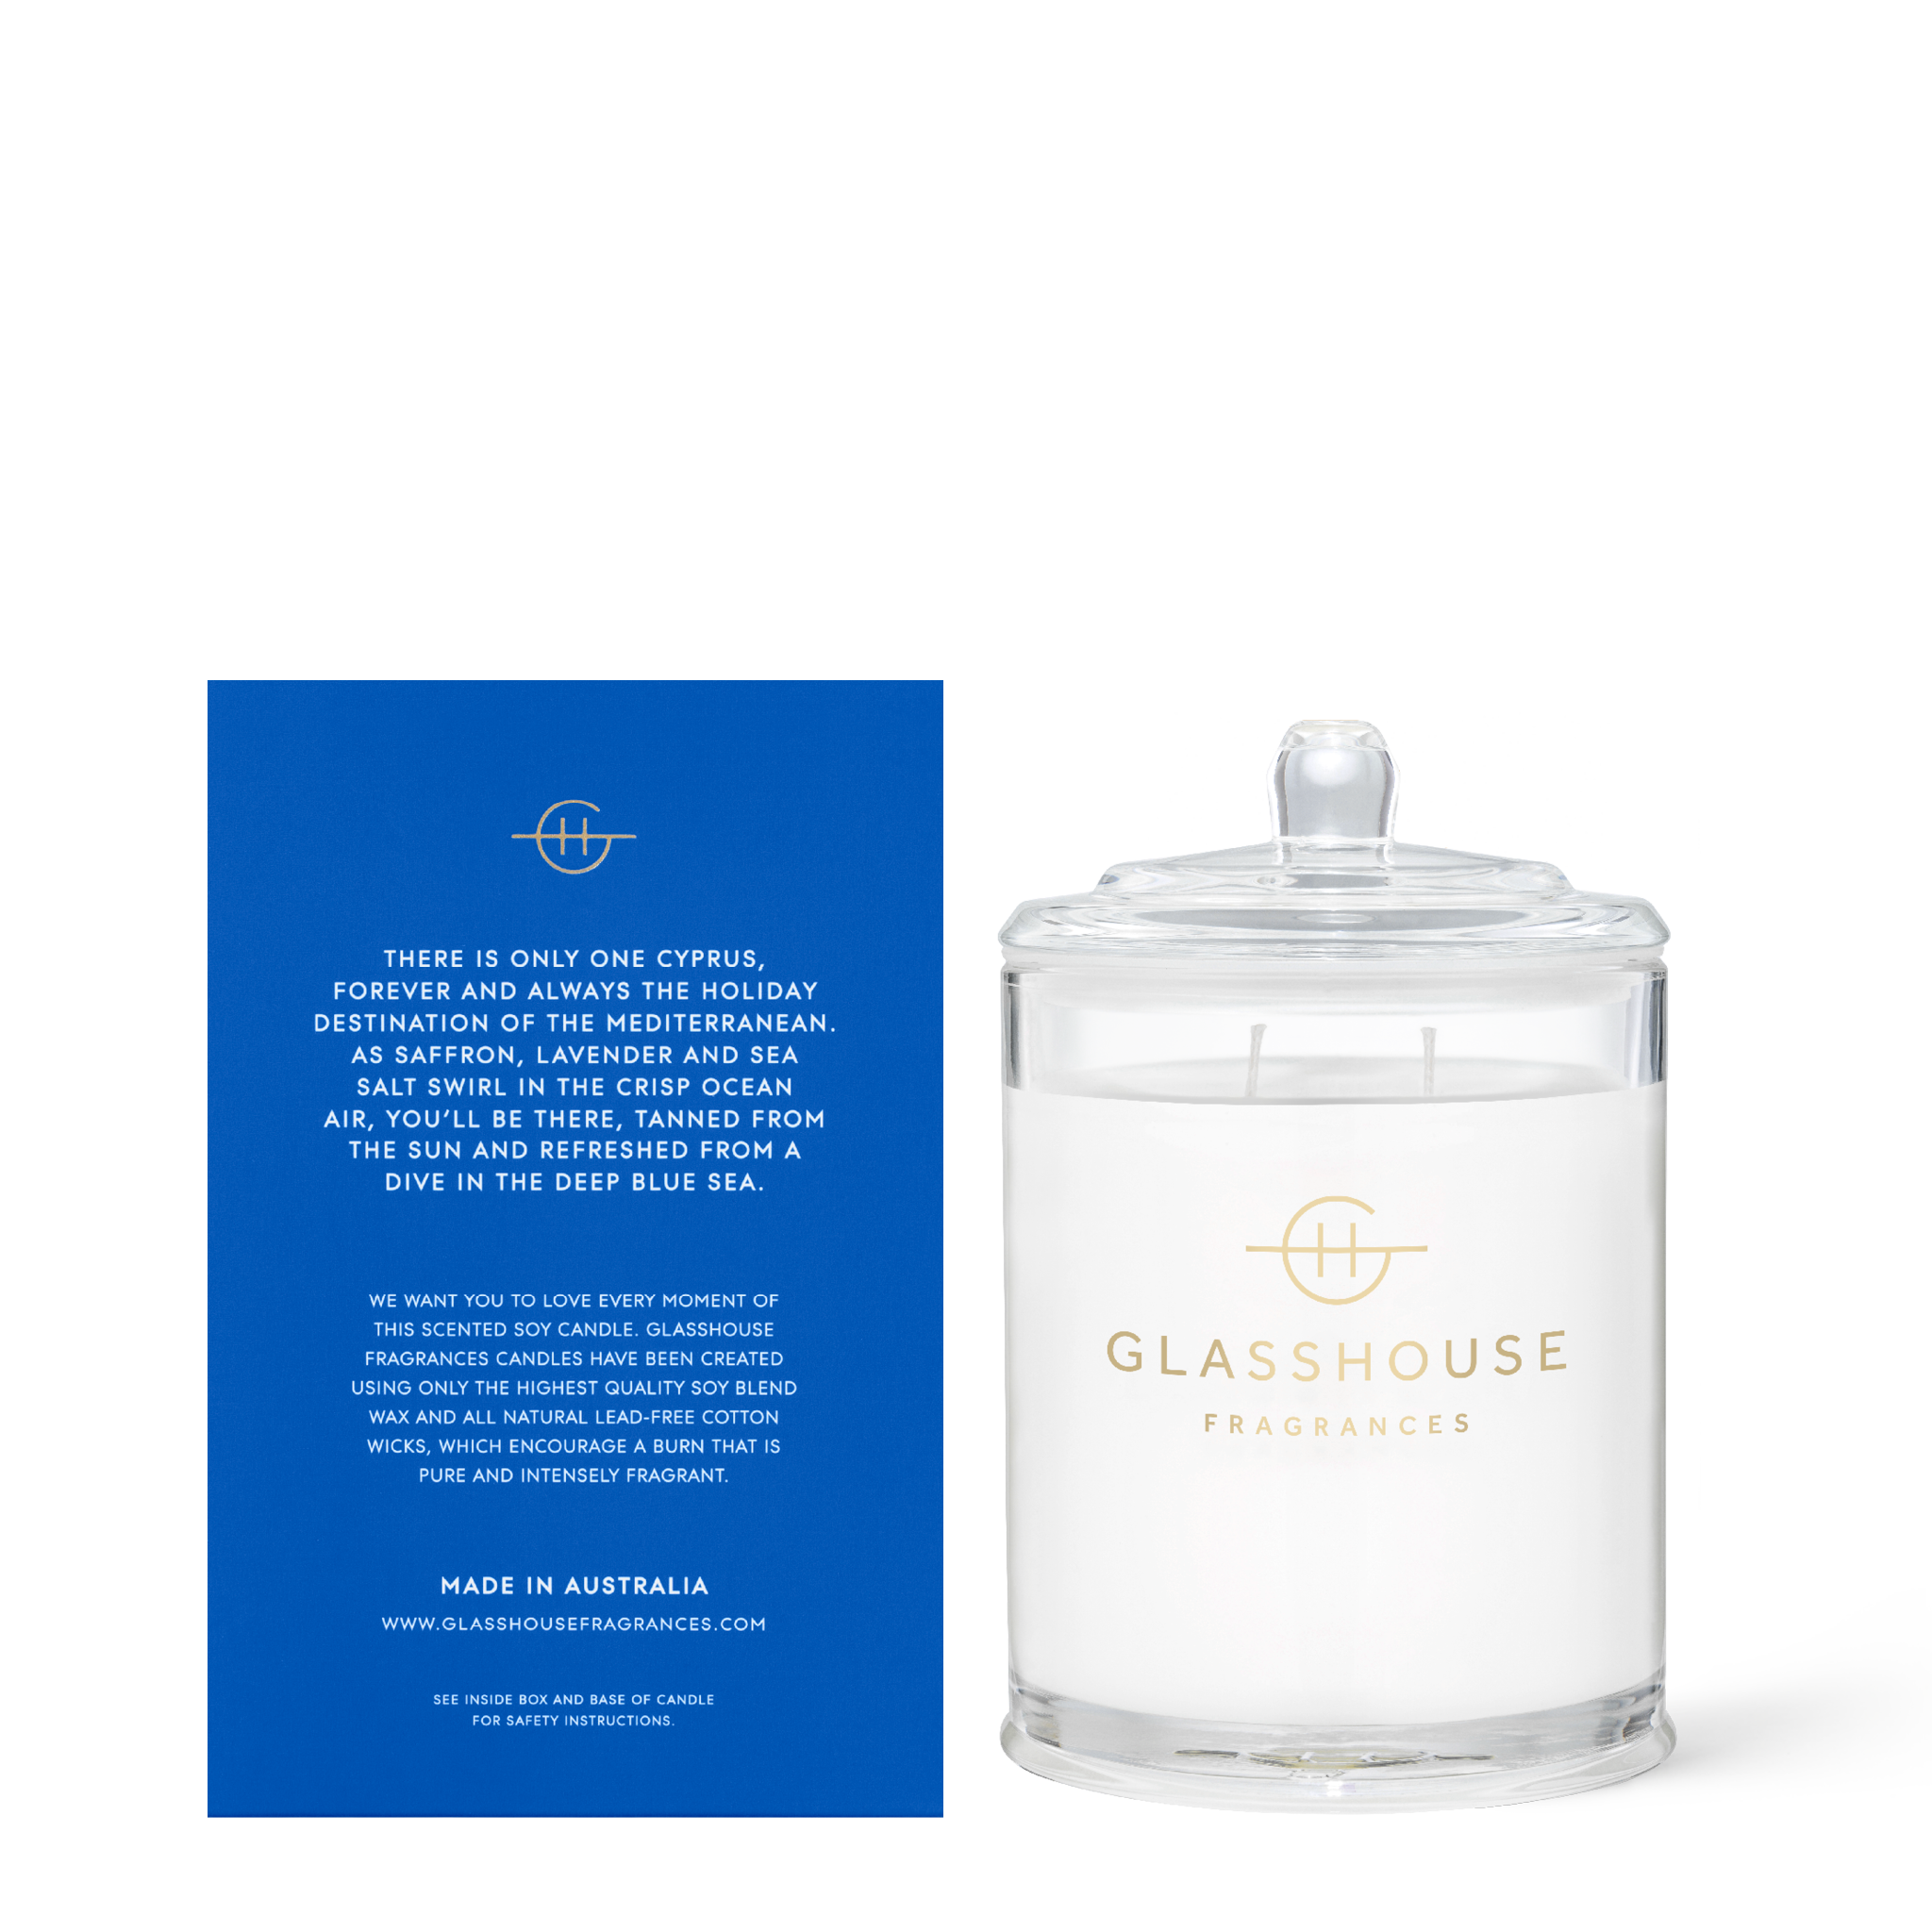 Glasshouse Fragrances Diving into Cyprus Sea Salt and Saffron 380g Soy Candle with box - back of product shot